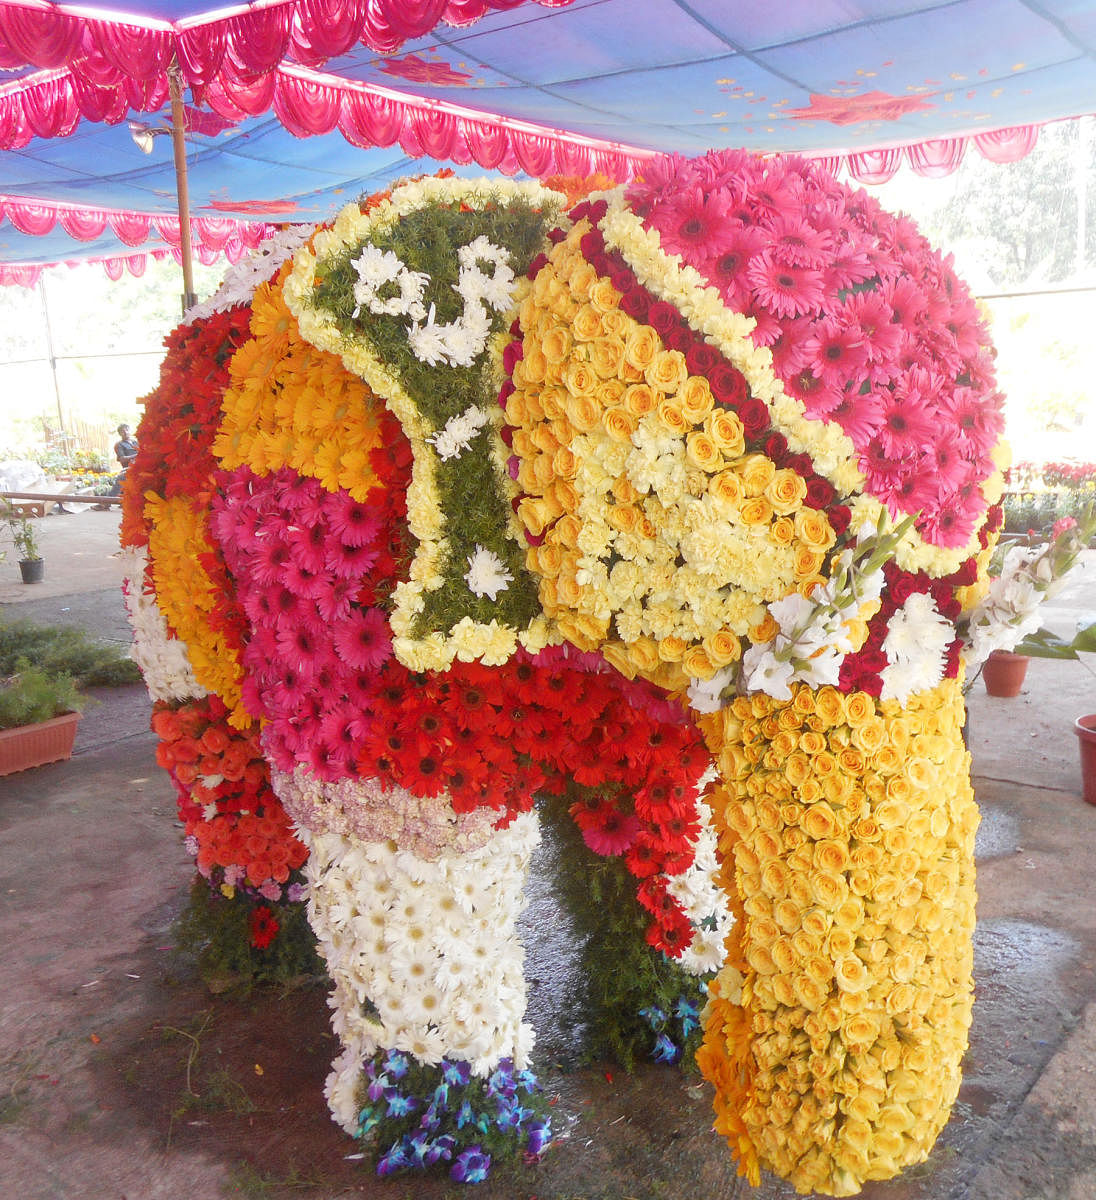 An elephant made of flowers exhibited at the flower expo in Udupi.